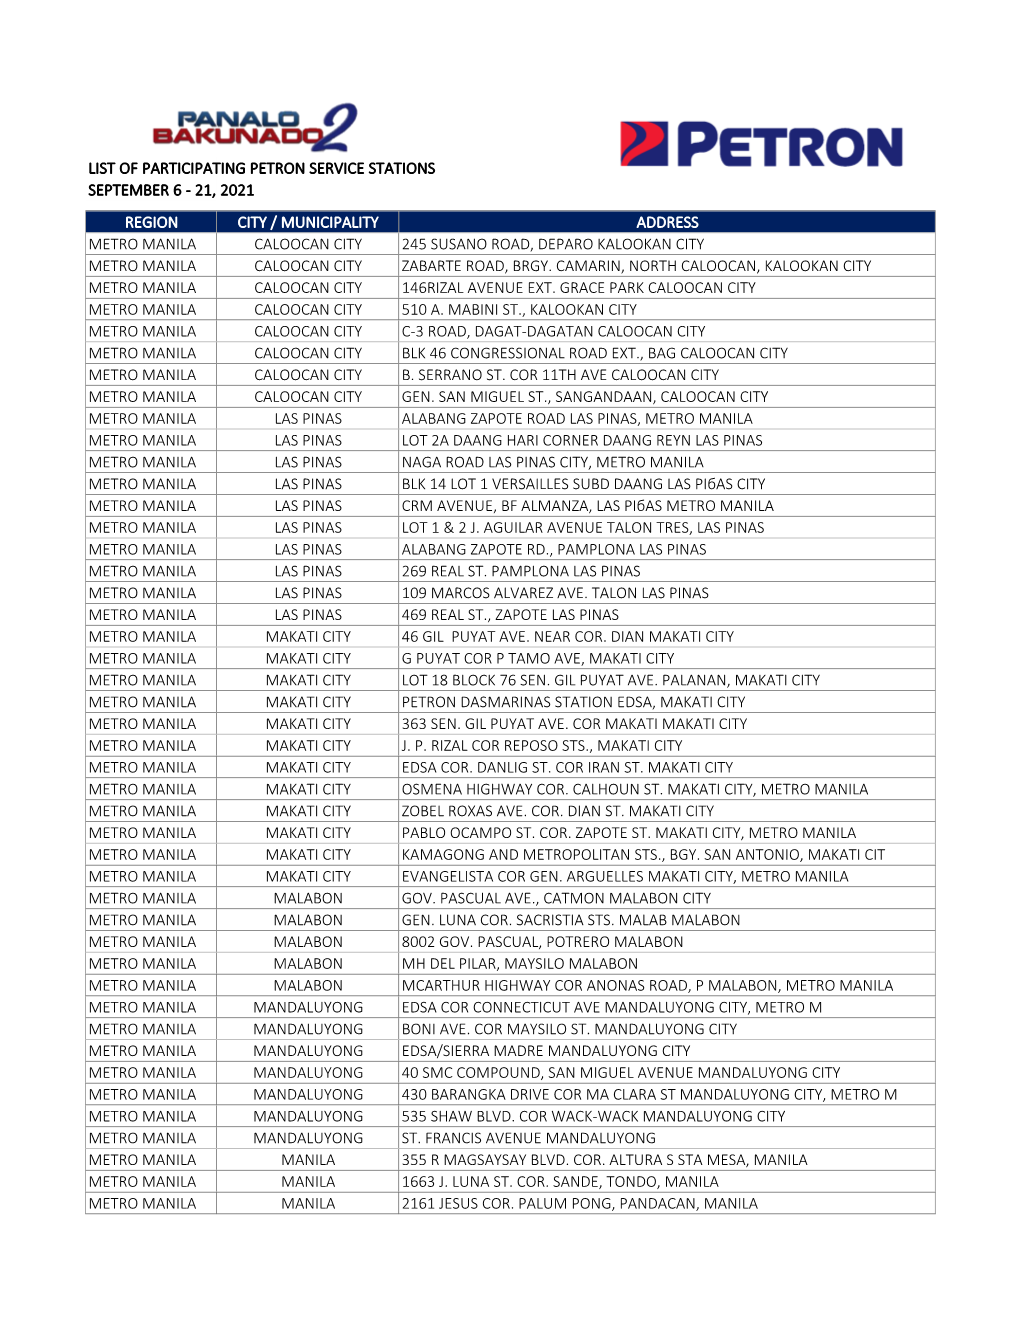 List of Participating Petron Service Stations September 6